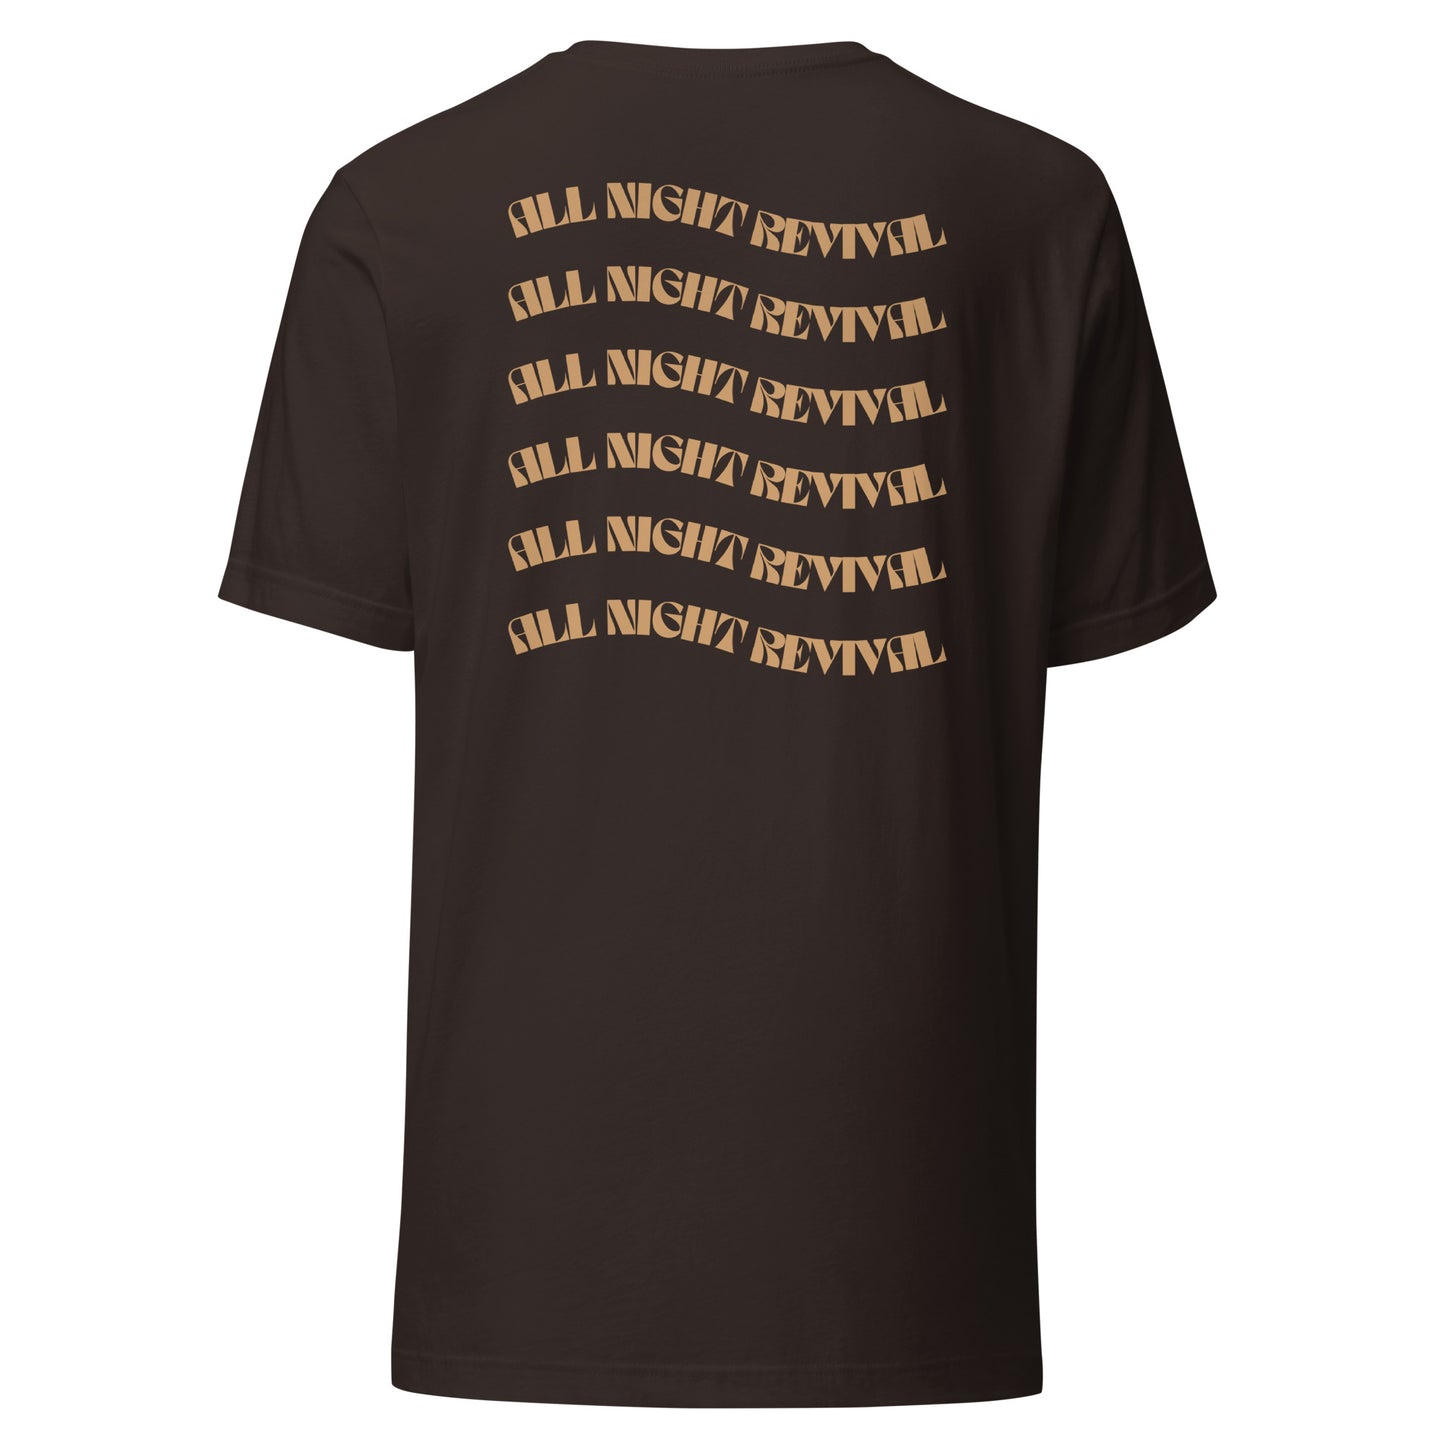 All Night Revival (Front and Back) T-Shirt